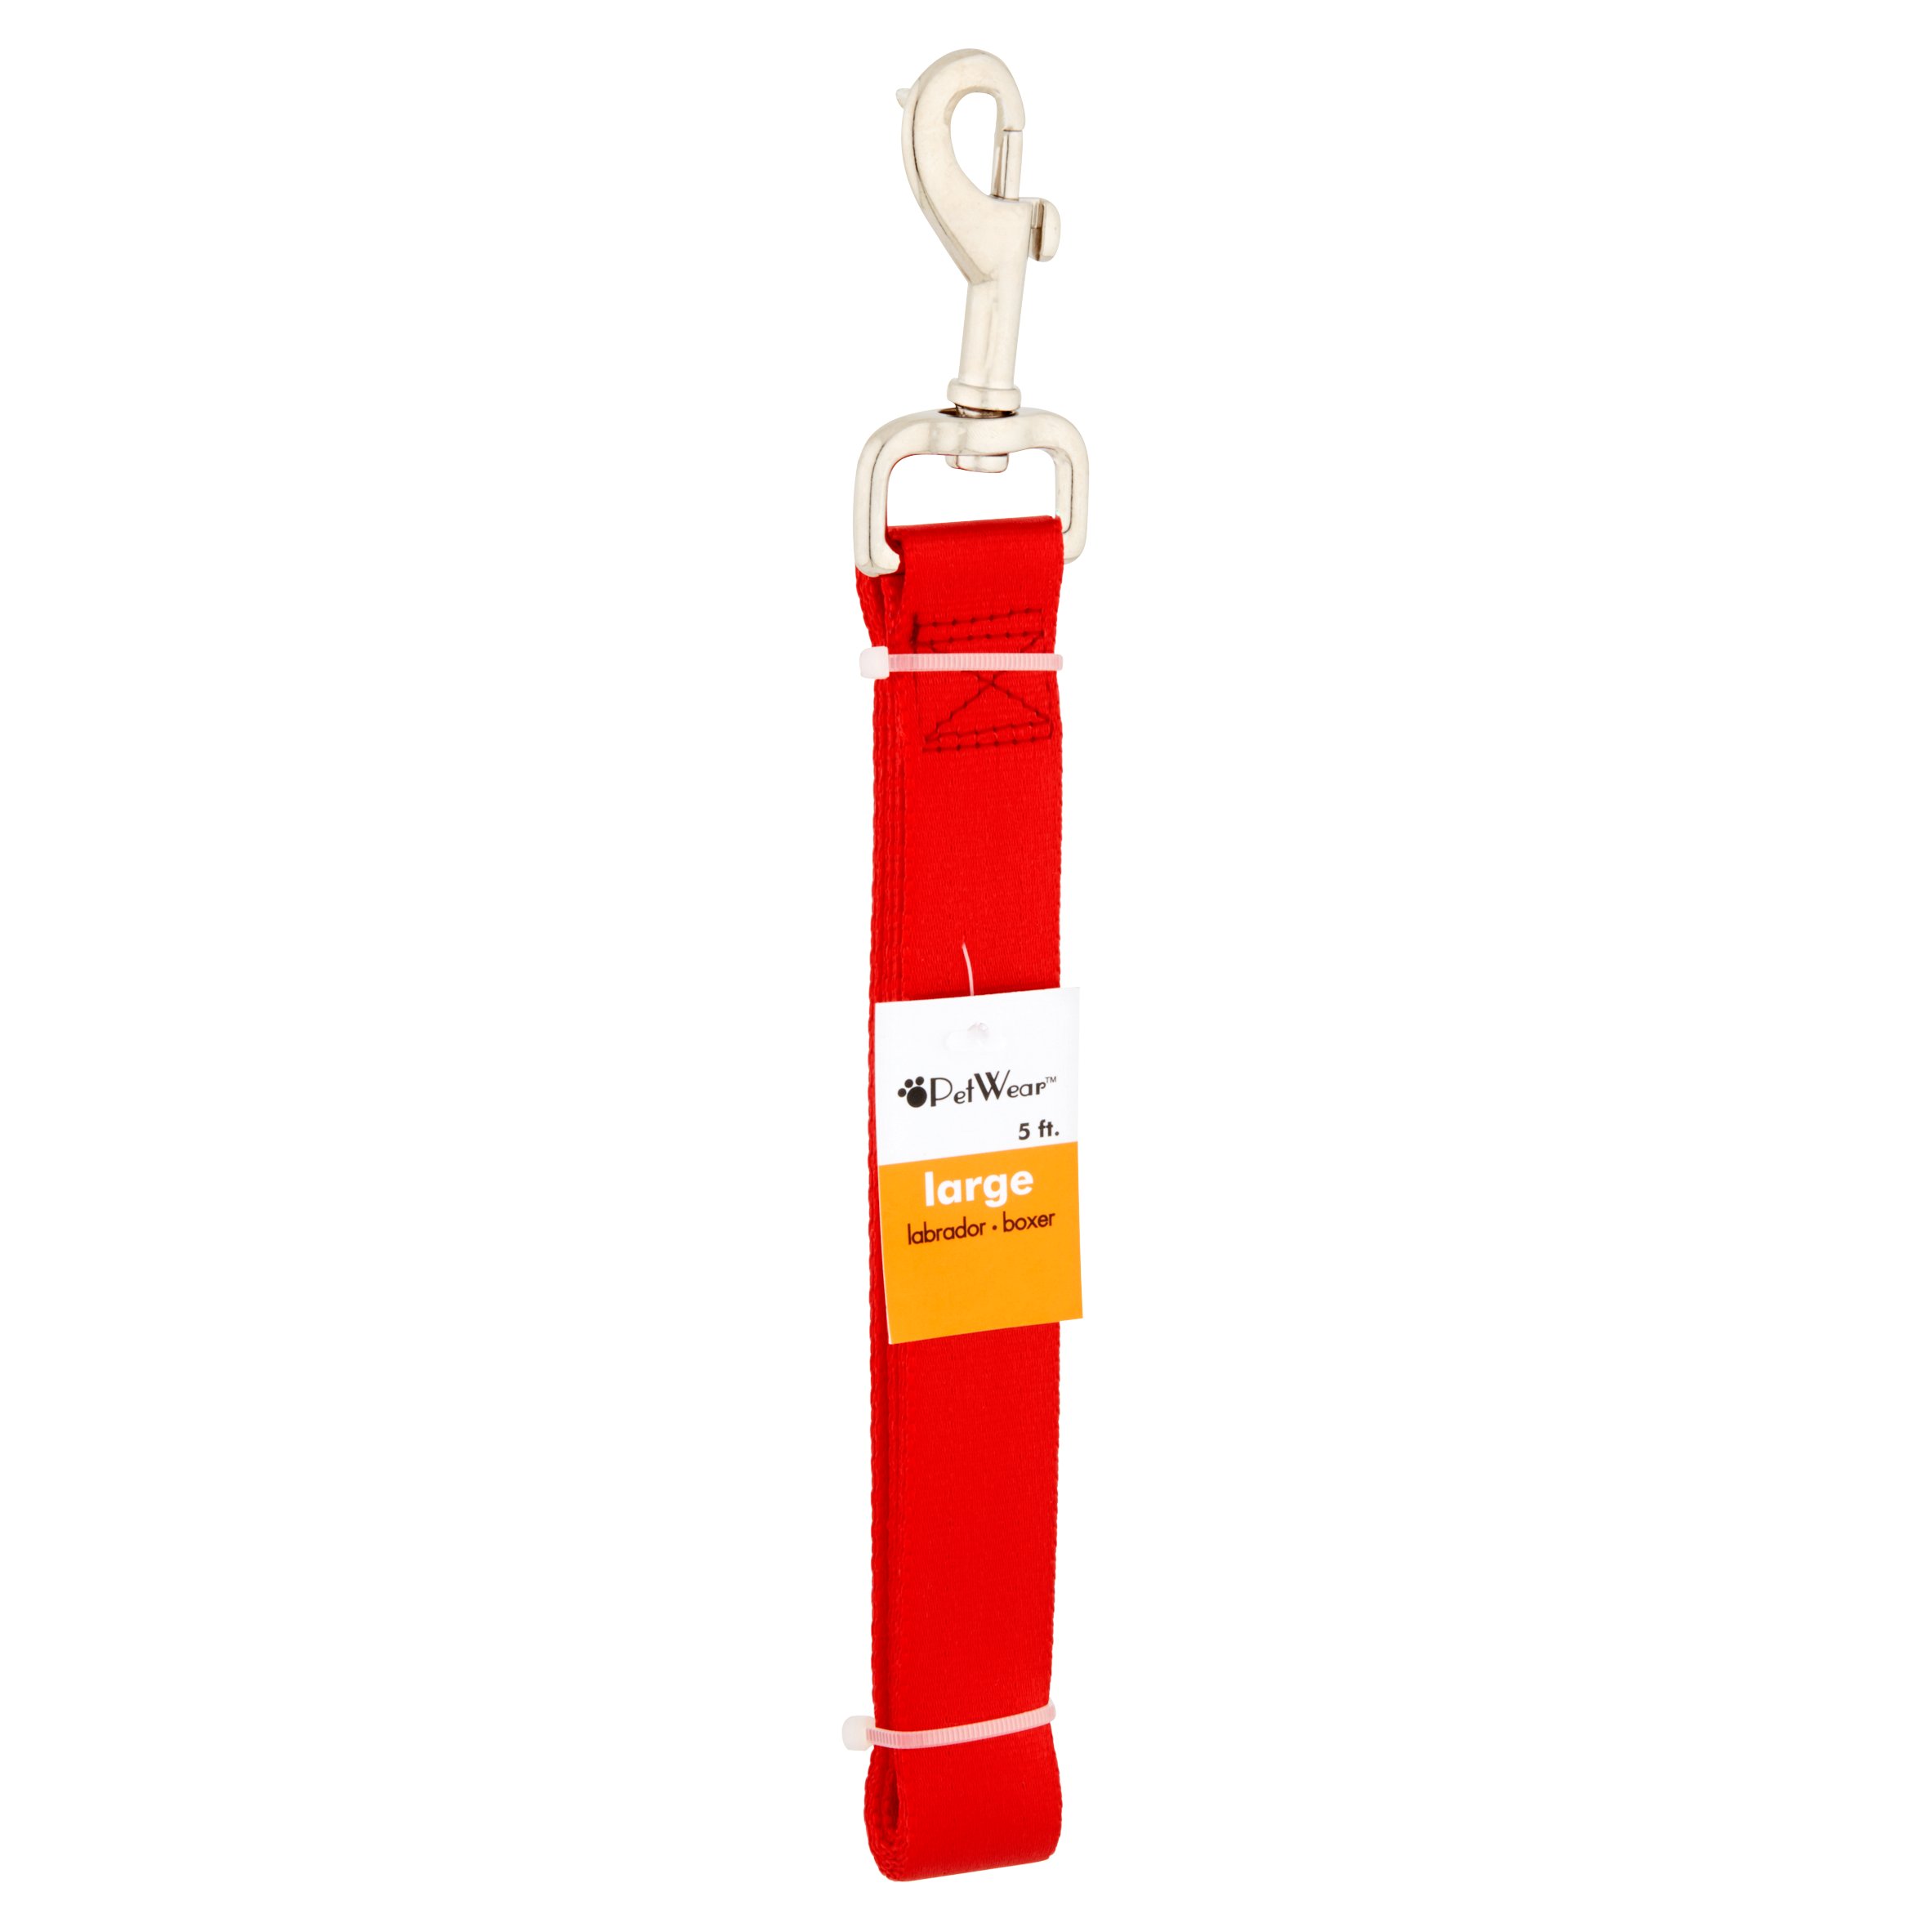 Pet Wear 5 ft. Large Red Leash - image 2 of 4